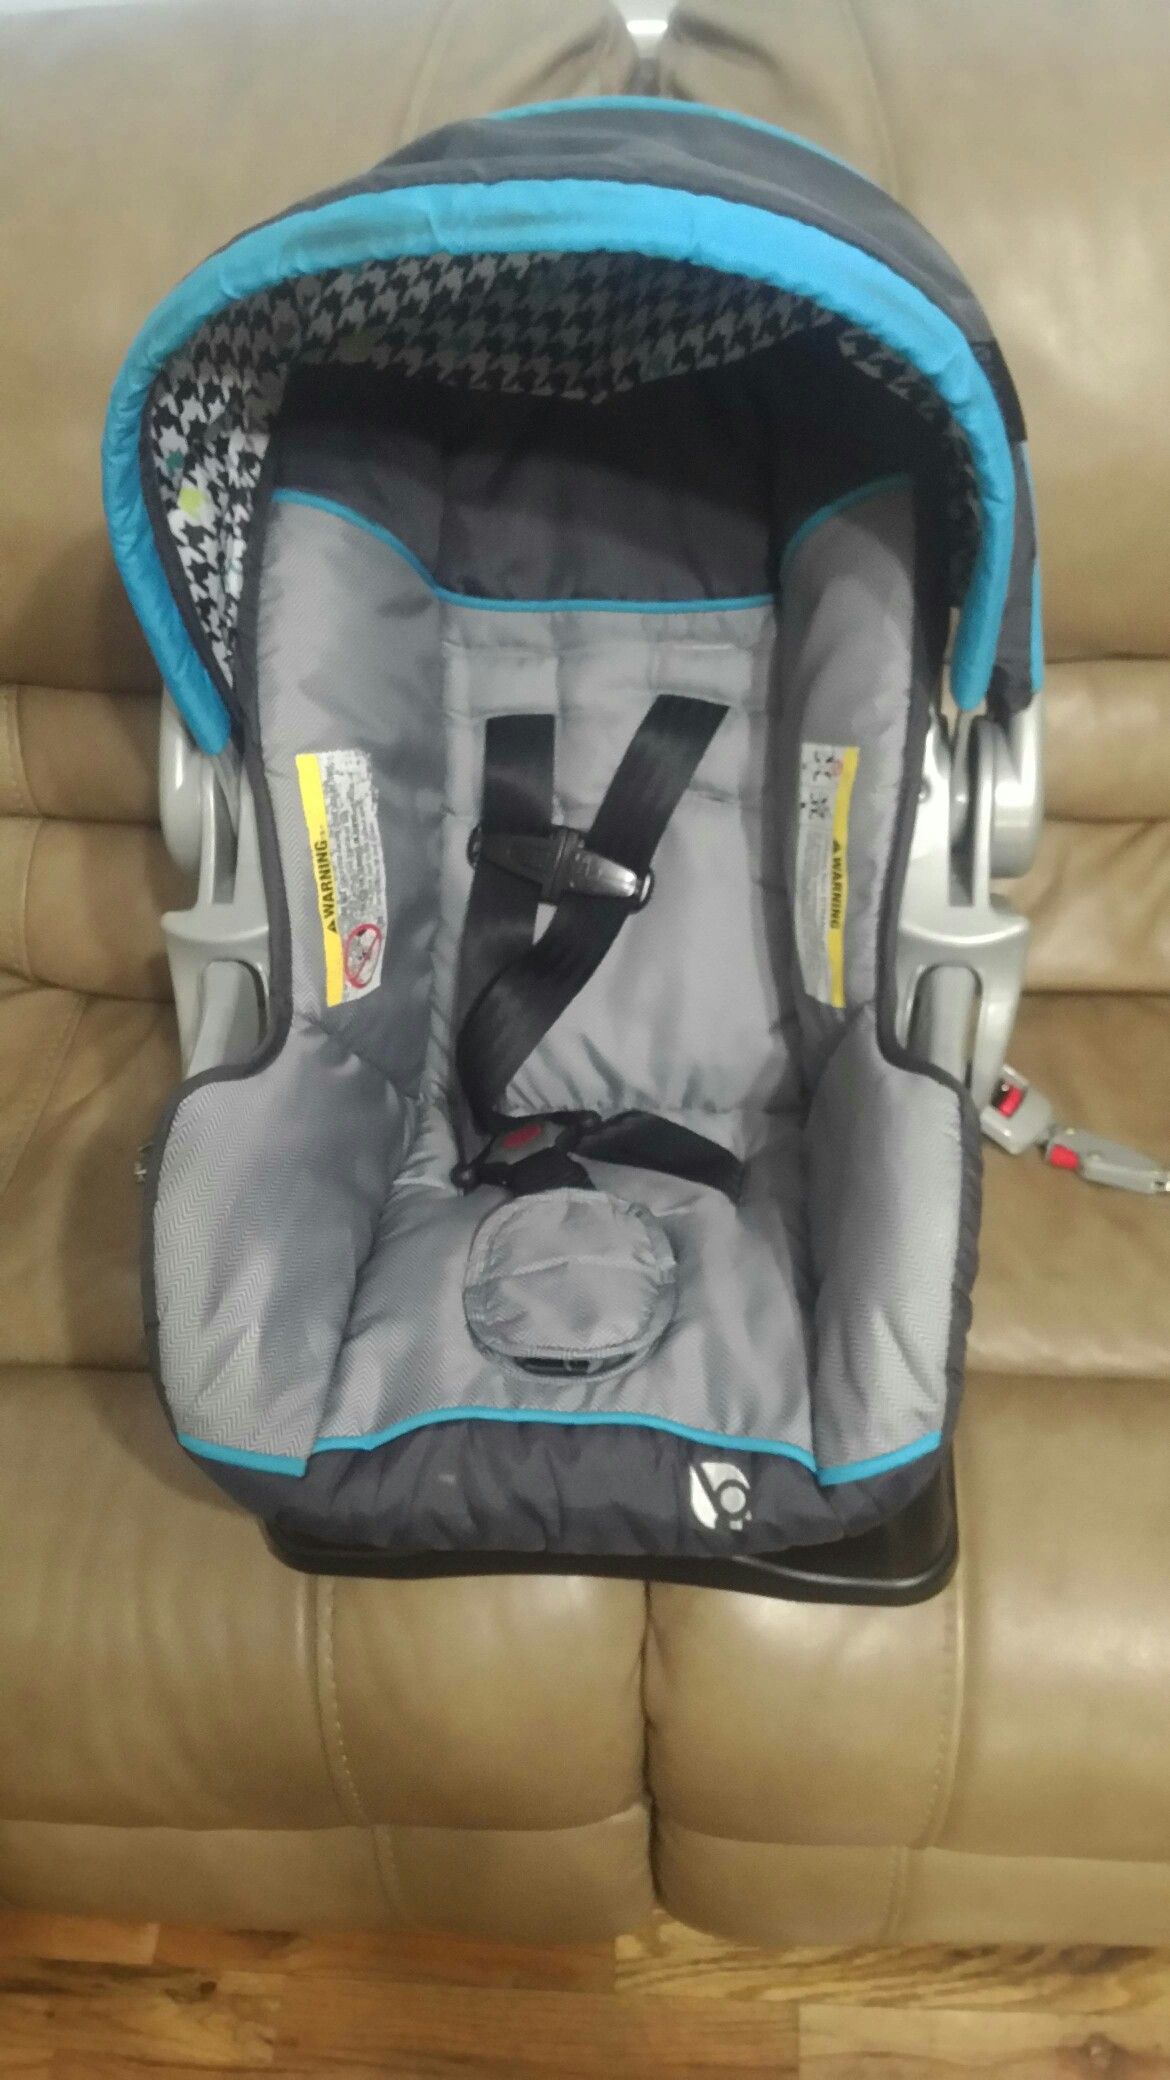 Car seat for $25.00